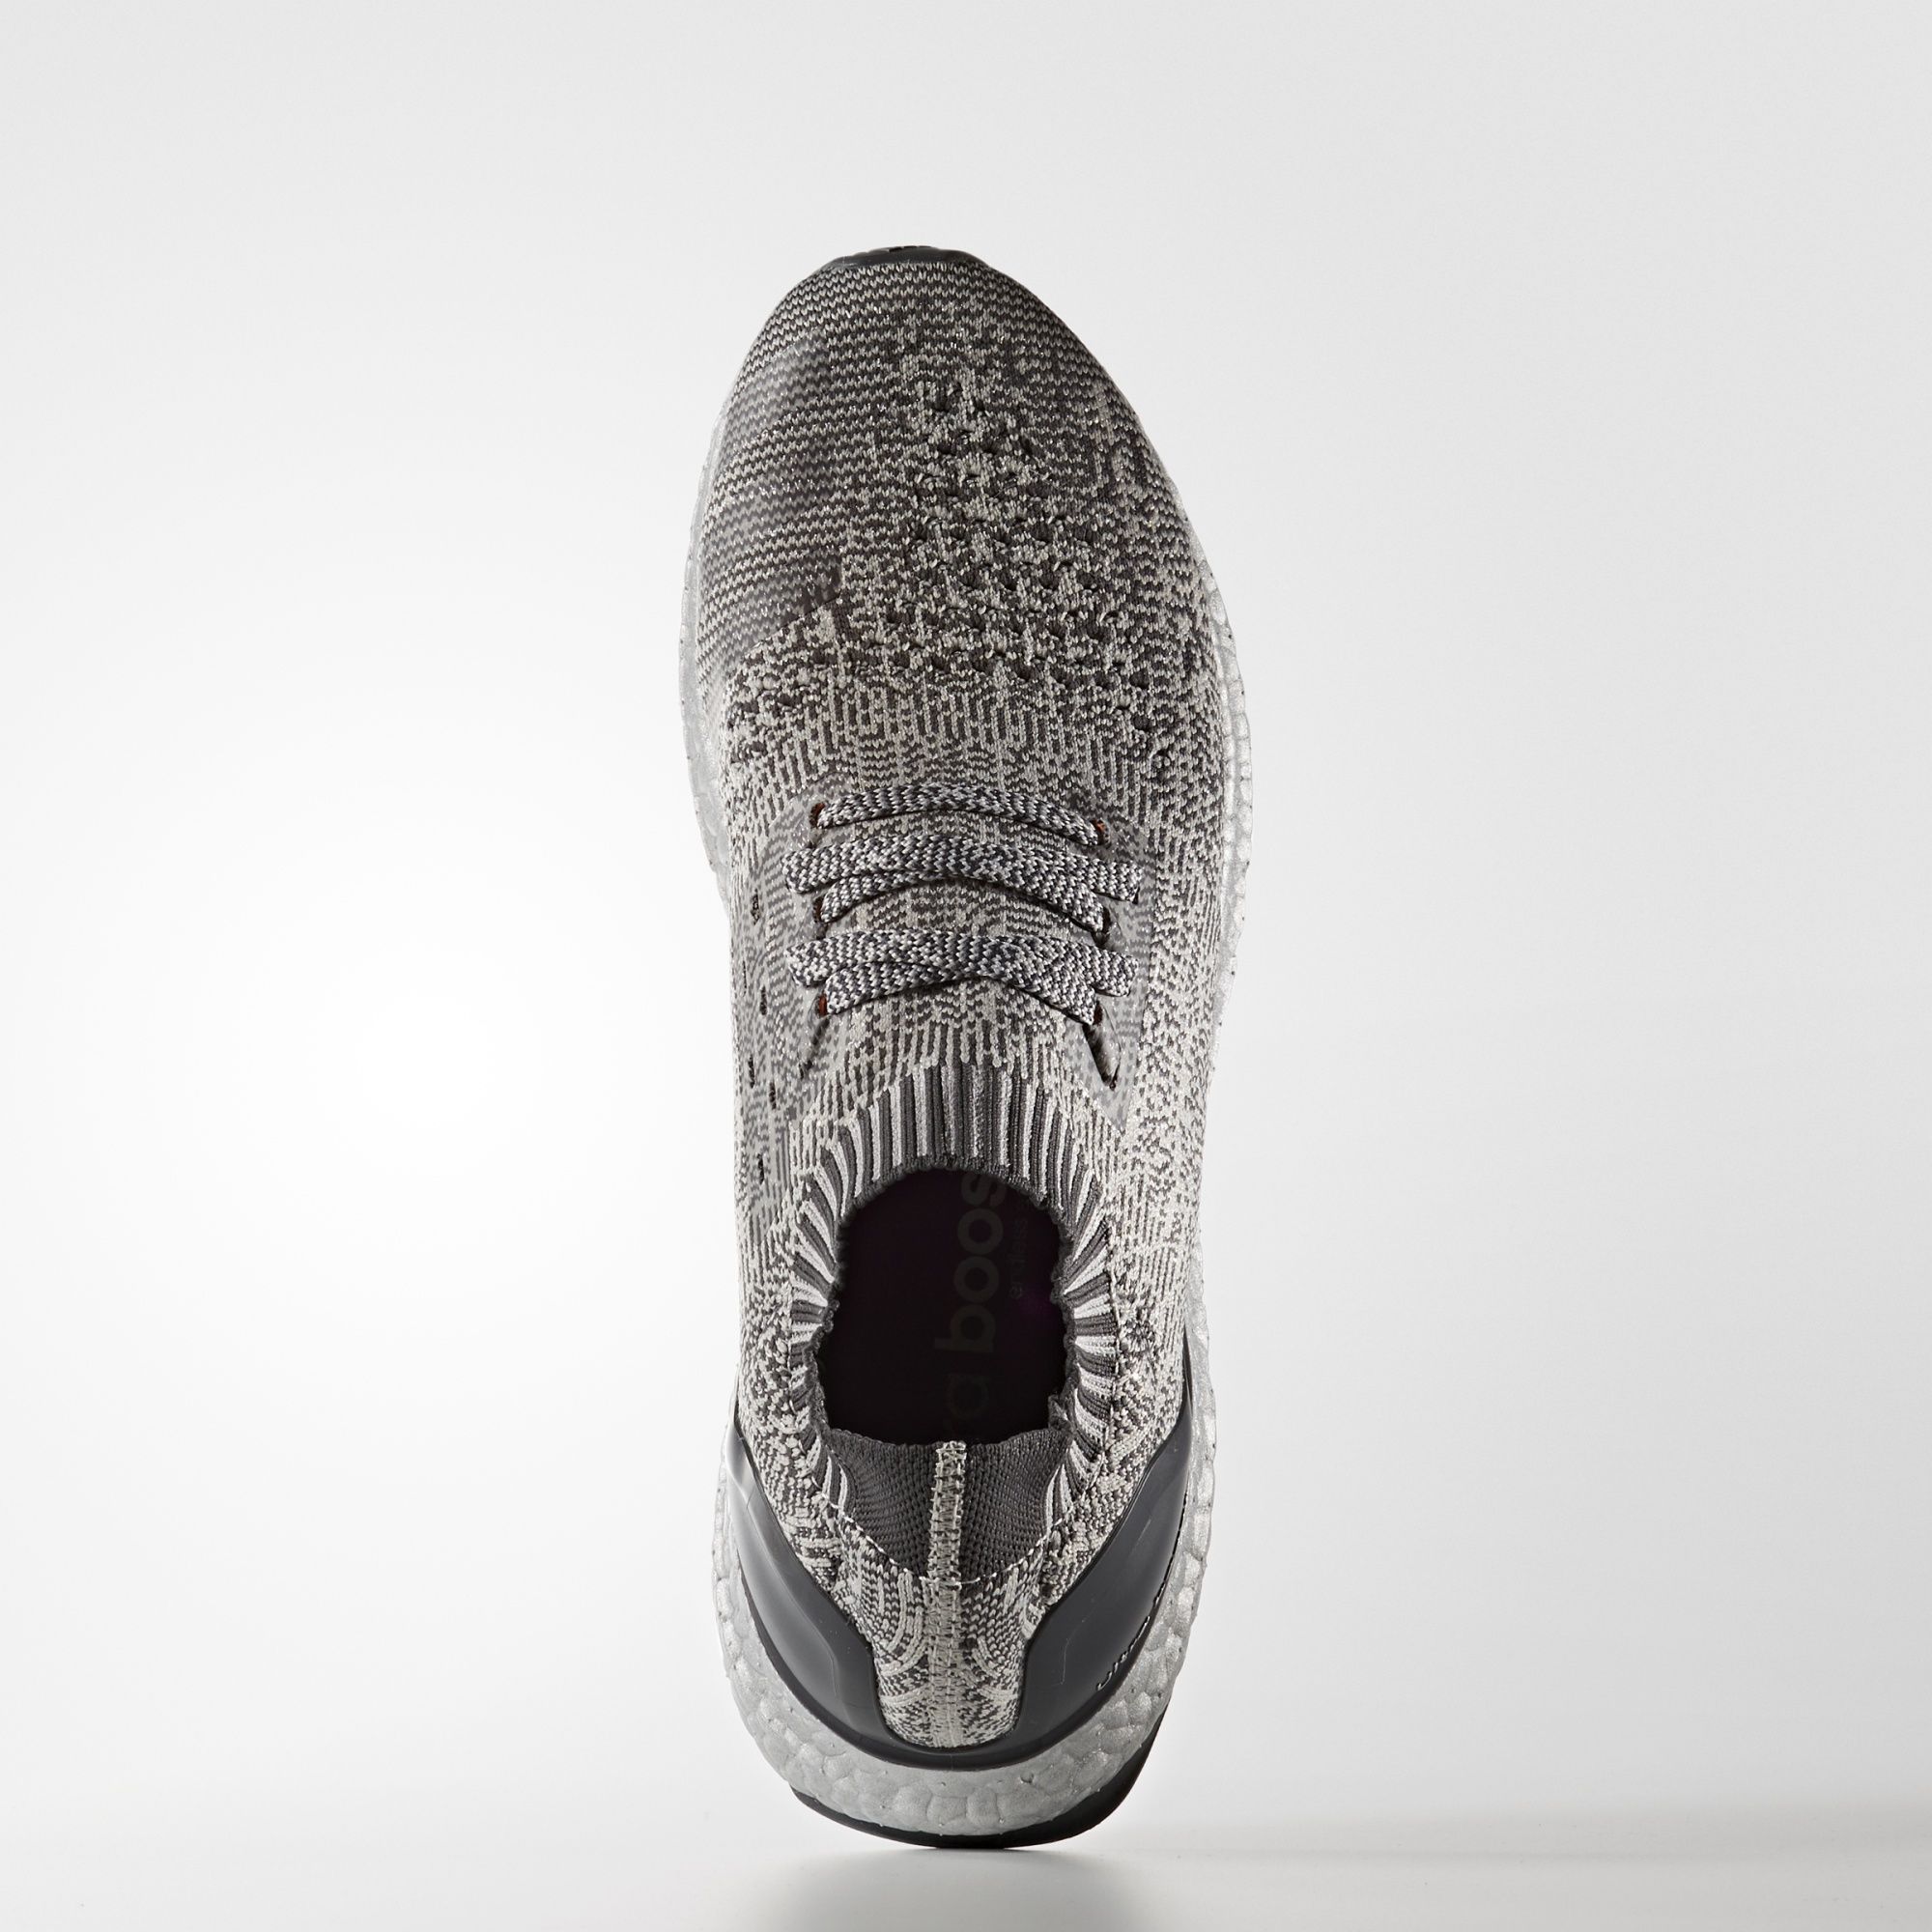 Adidas UltraBOOST Uncaged
« Silver BOOST »